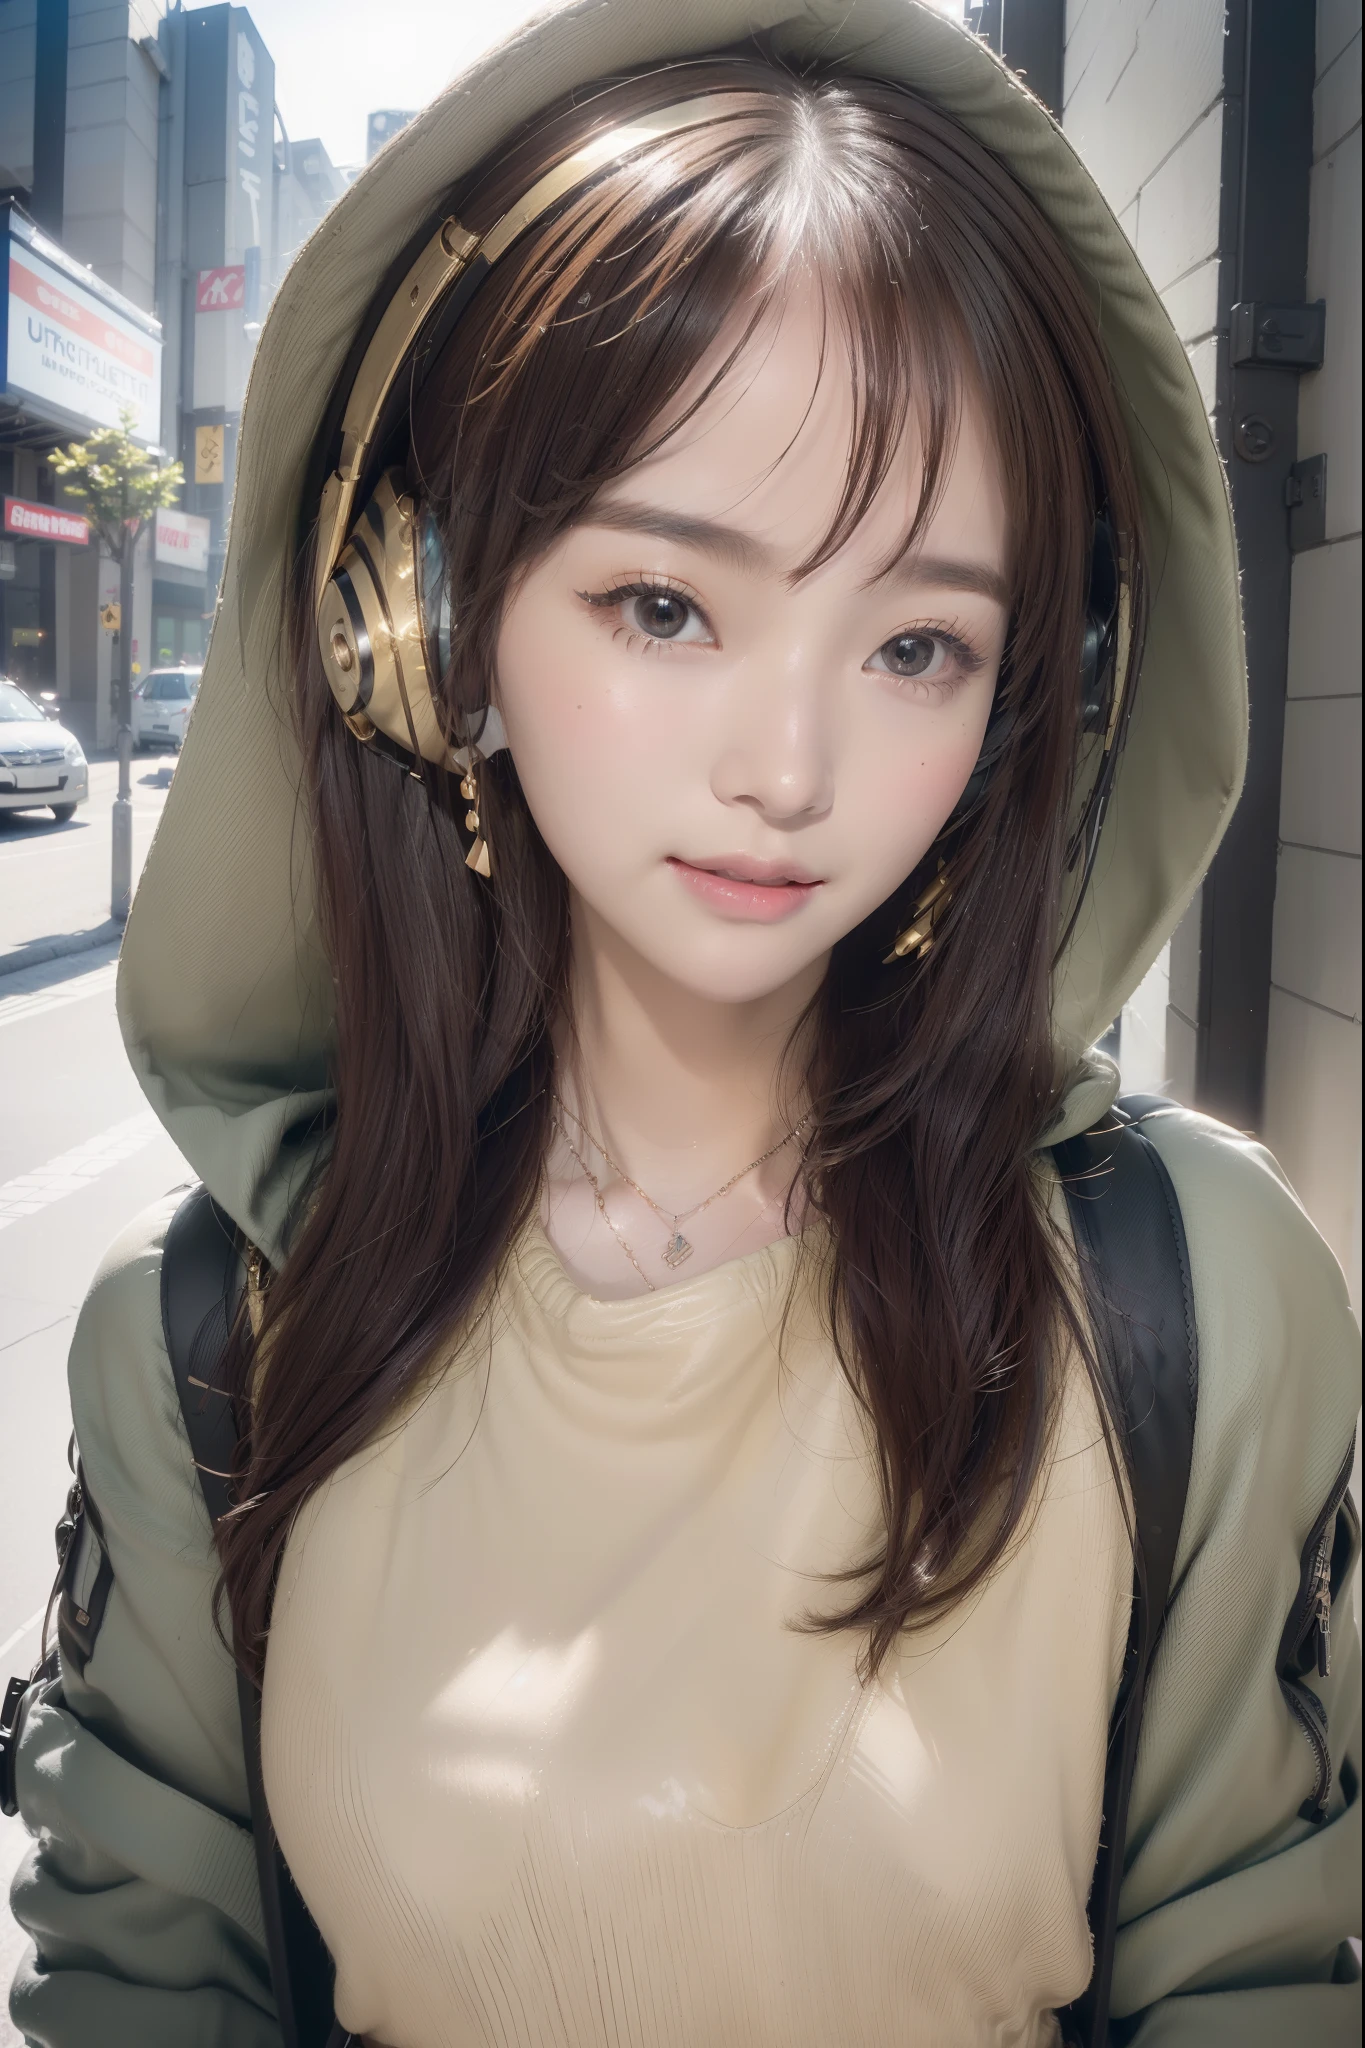 (((top-quality, 8K,超A high resolution、ultra-detailliert))),1girl in,female high-school student,a beauty girl,Street attire,((Hooded Neon Over Jacket,shortpants,backpack))、((Wearing large headphones around your neck))、(Shorthair with light brown hair,Colorful Extended Hair),perfectbody,skinny, Tied waist,Beautiful face, acurate, Anatomically correct, Highly detailed face and skin texture, Big eyes drawn in detail, Double eyelids, Thin eyebrows, Glitter Eyeliner: 1 Natural cheeks, Glossy skin, Fair skin: 1.2, (Glossy lips: 1.4),Highly detailed facial and skin texture, Detailed eyes, Double eyelids, Natural cheeks, , shiny lips: 1.4,Simple necklace and earrings,Smile and watch the viewer,Walking in the city,【Not blurry,profetional lighting,Professional effectasutepiece: 1.3), (max resolution: 1.2), (Ultra HDTV: 1.2),octanerender, Fujifilm X100, Intense cinematic shots, Shallow depth of field, Volumetric lighting, kintsugi,(8K、Raw photography、​masterpiece:1.4)、(realisitic、Photorealsitic:1.37)、Shot with CineStill 800T、(Extreme top quality:1.3)、((depth of fields:))、absurderes、(超A high resolution、extremery detailed CG、hight resolution、realisitic、ultra-detailliert、a picture、A hyper-realistic、ultra-detailliert、Cinematic atmosphere、8K UHD、insanely detaileda、trending on artstationh、awardwinning photo、extremely detailed photo、hight resolution:1.5)】No tags or text